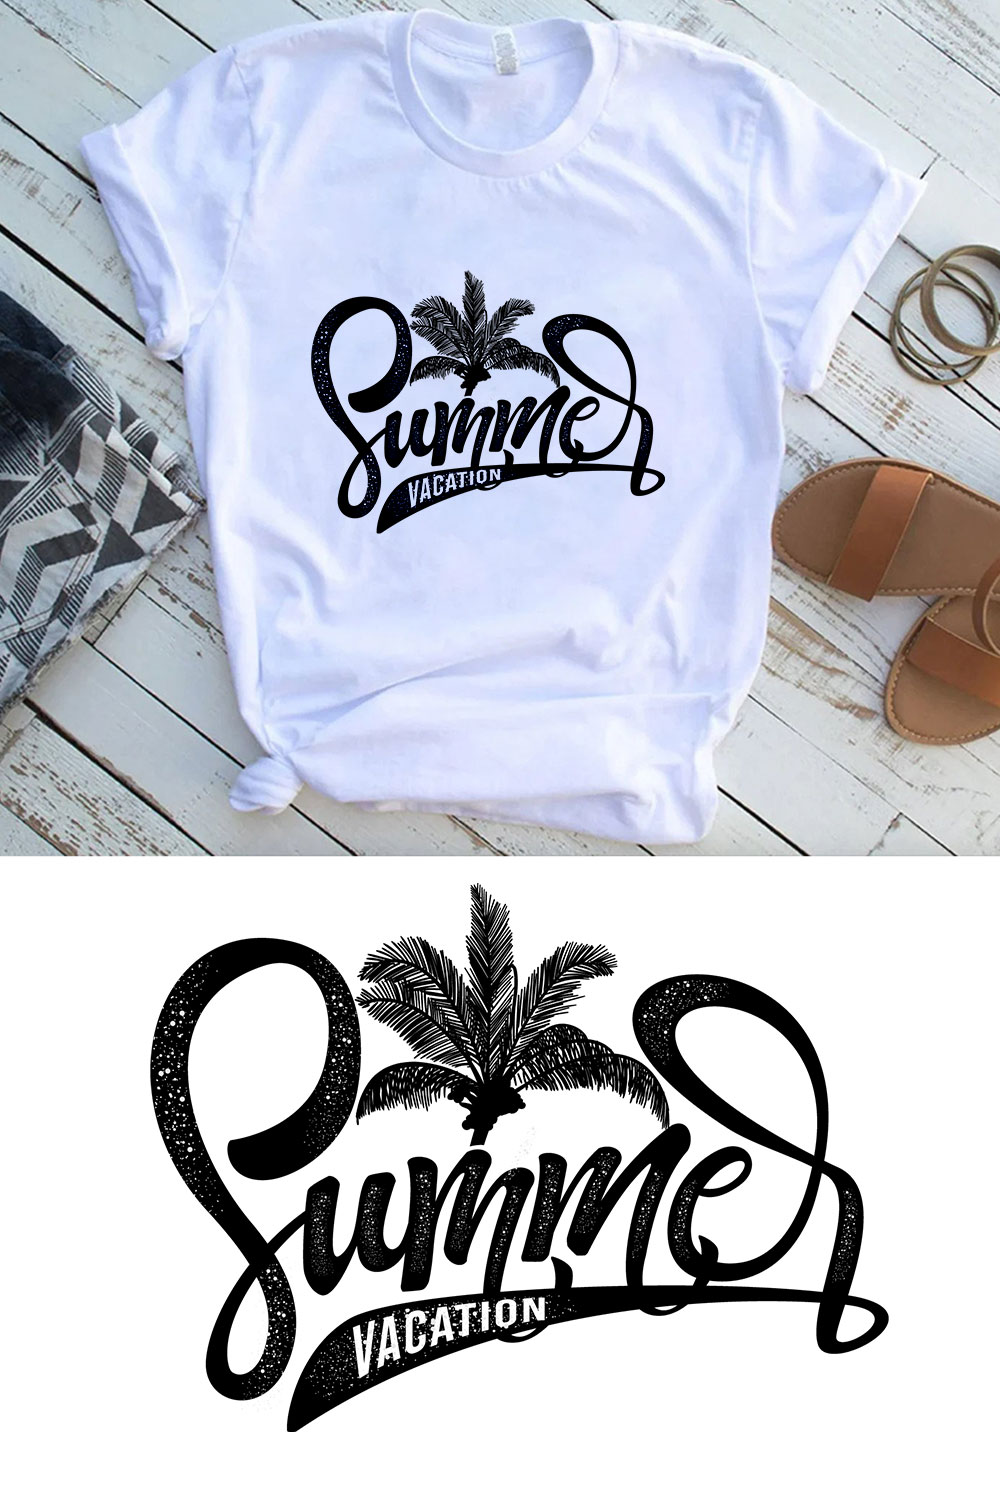 Tropical summer vacation t-shirt pinterest preview image.